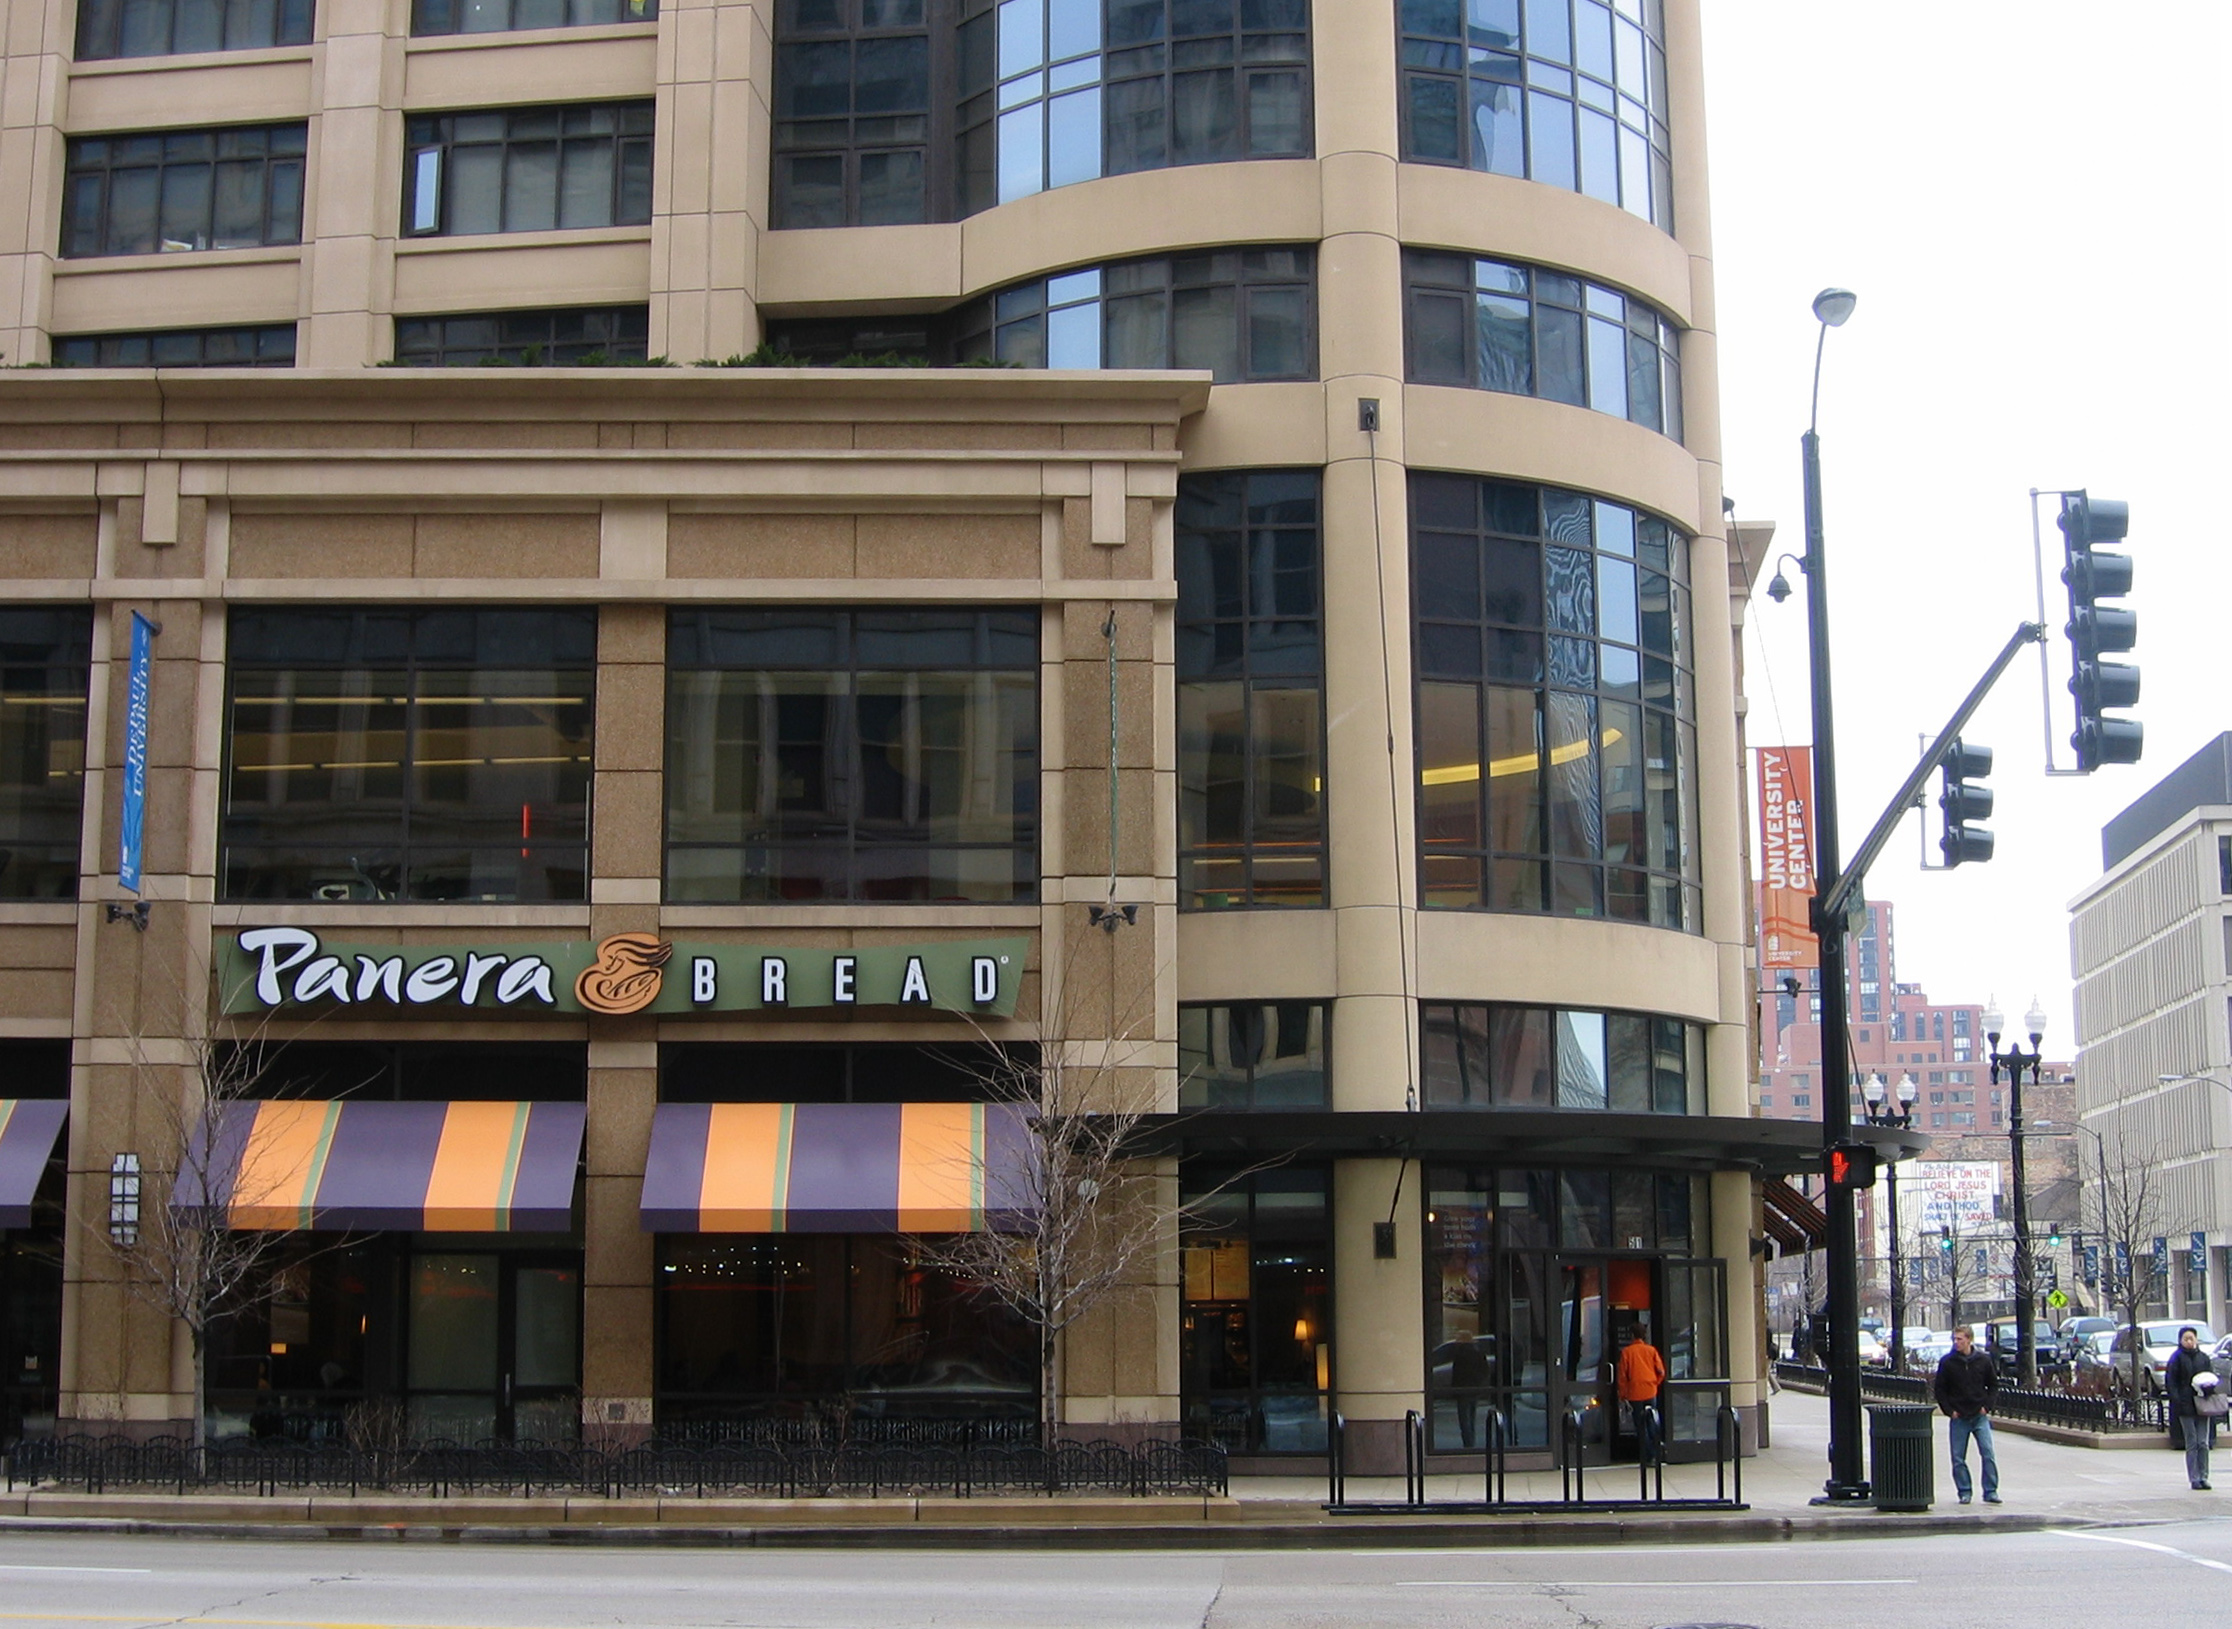 A Panera Bread store front.